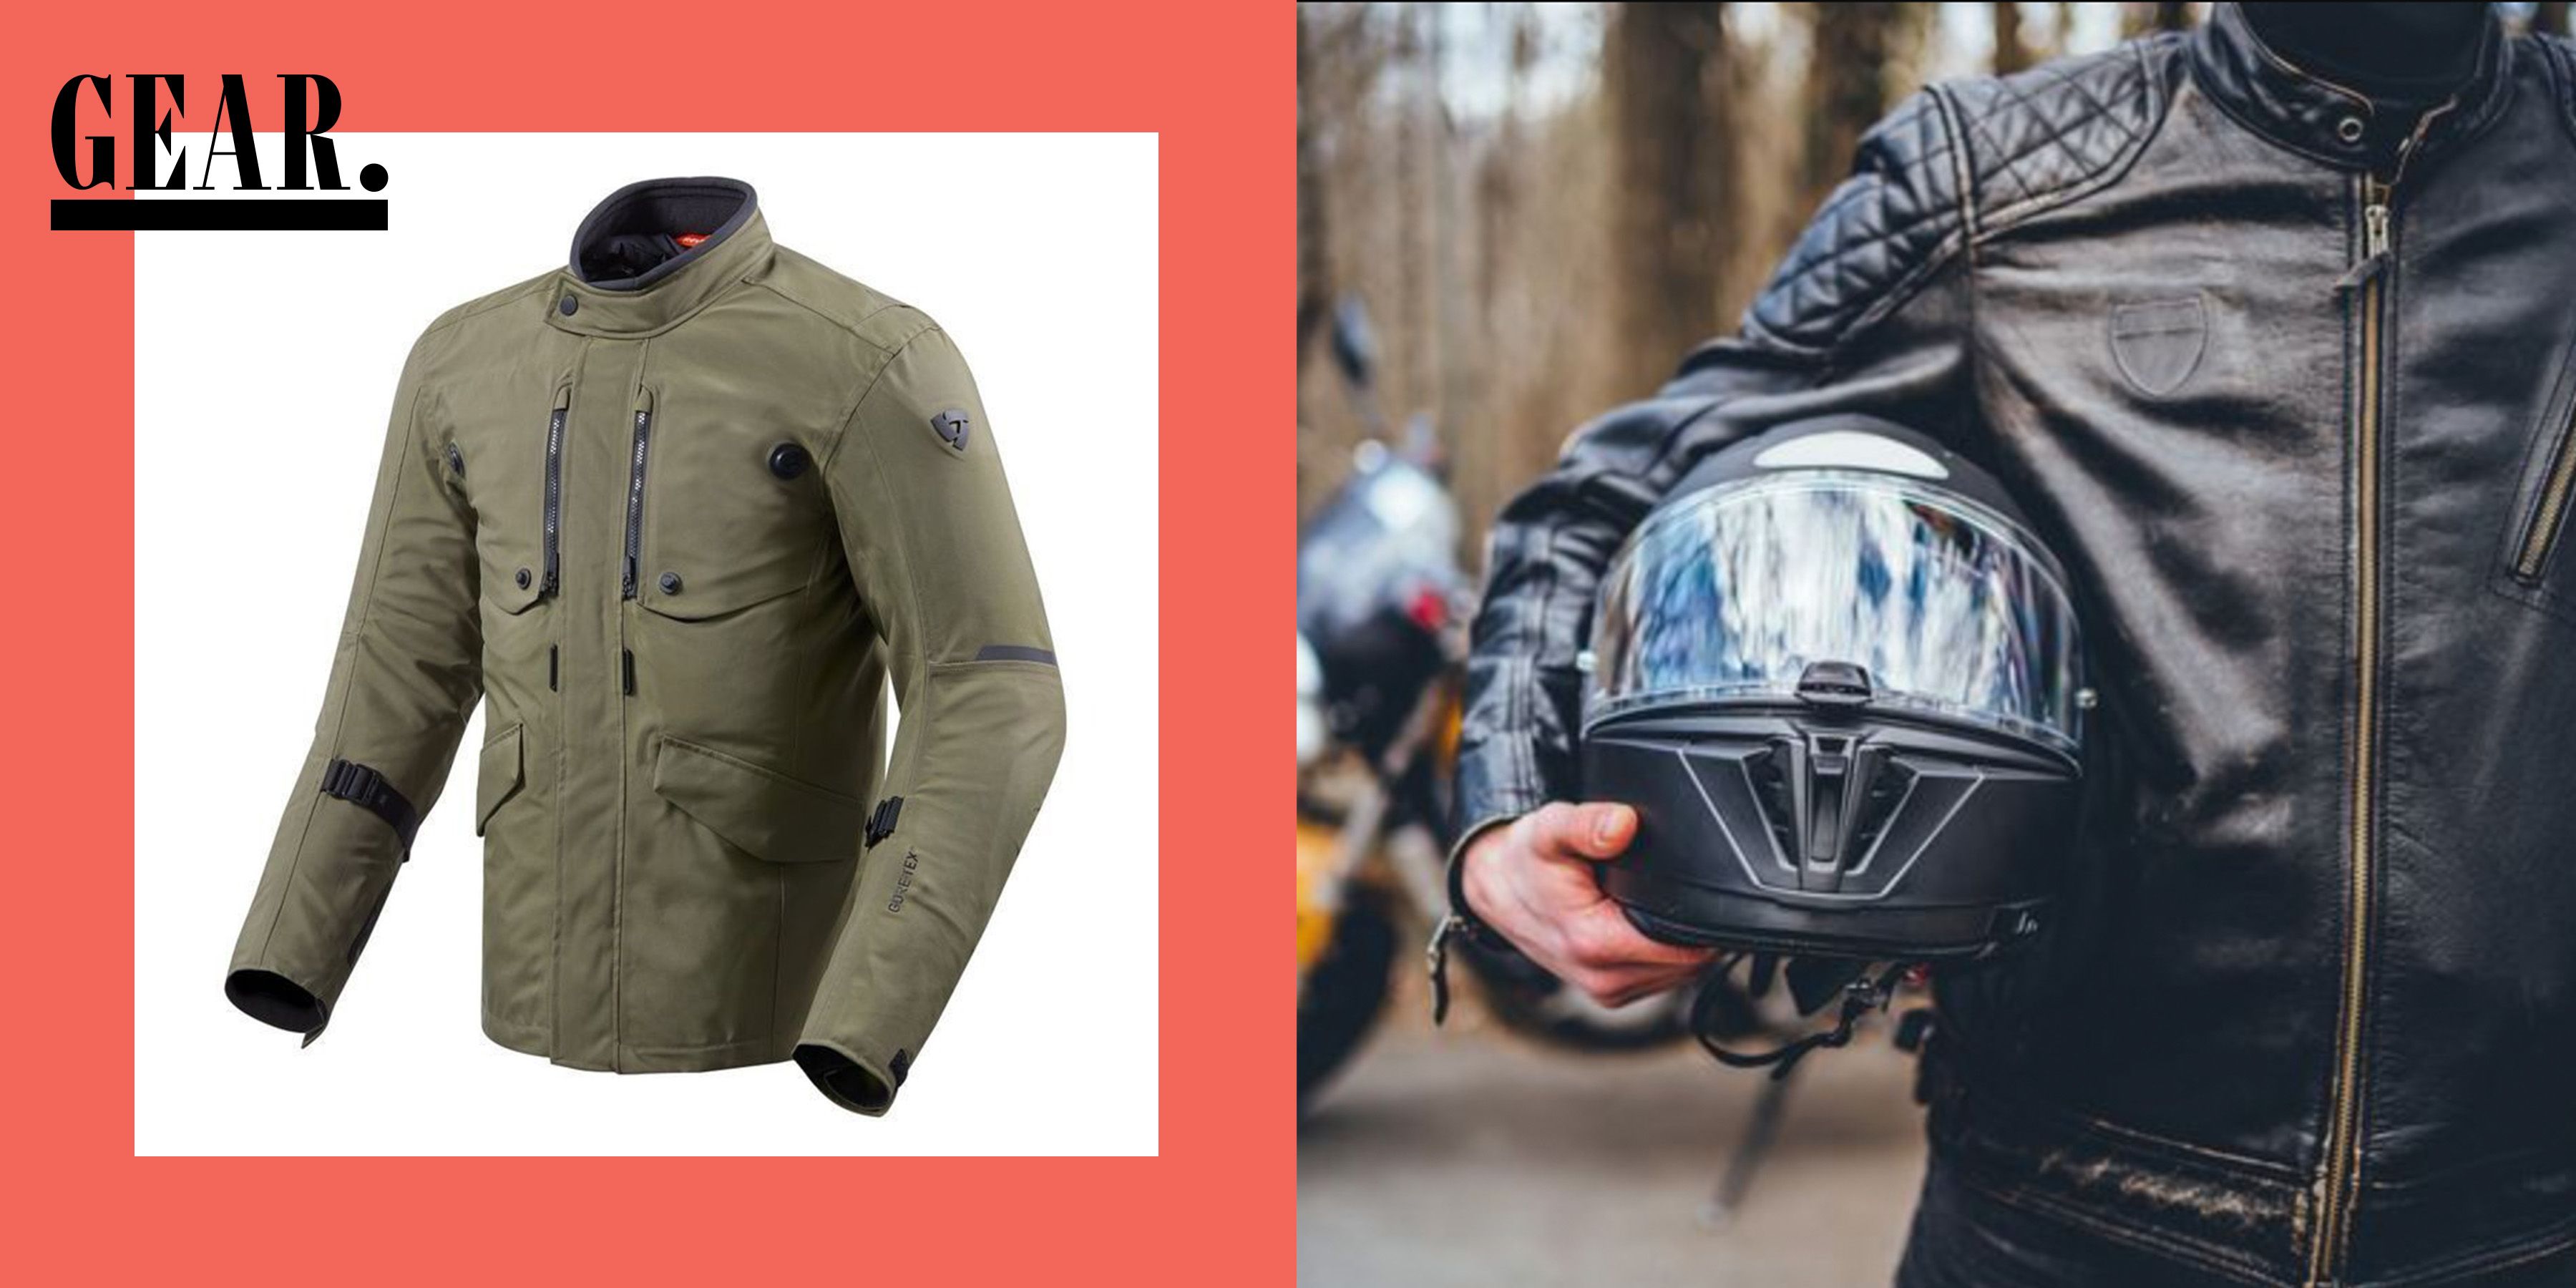 Here Are the Best Motorcycle Jackets You Can Buy, According to the Pros